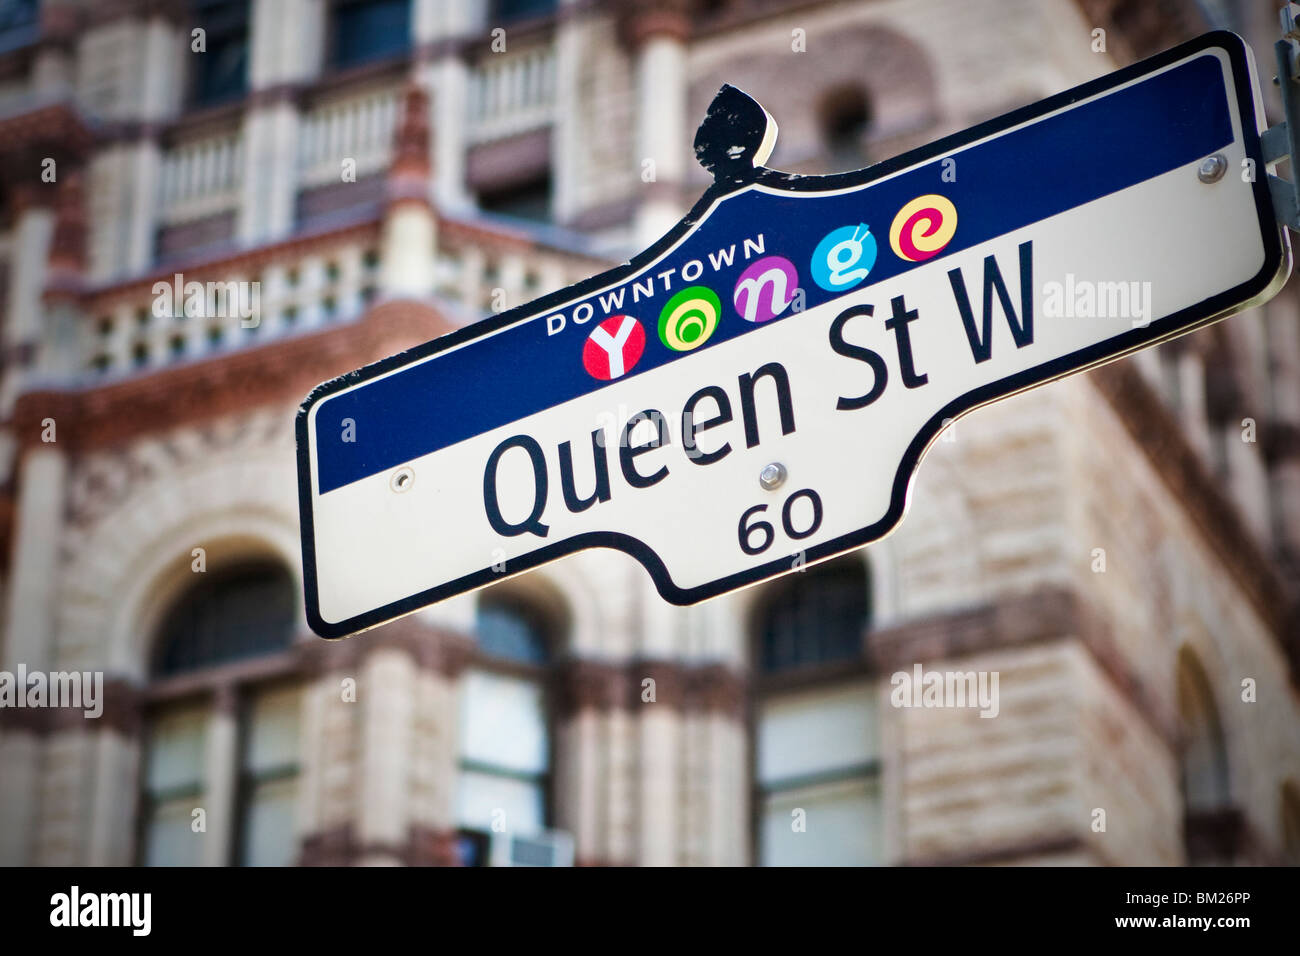 "Younge downtown' logo sono visibili su un letto Queen Street West Street sign in Toronto Foto Stock